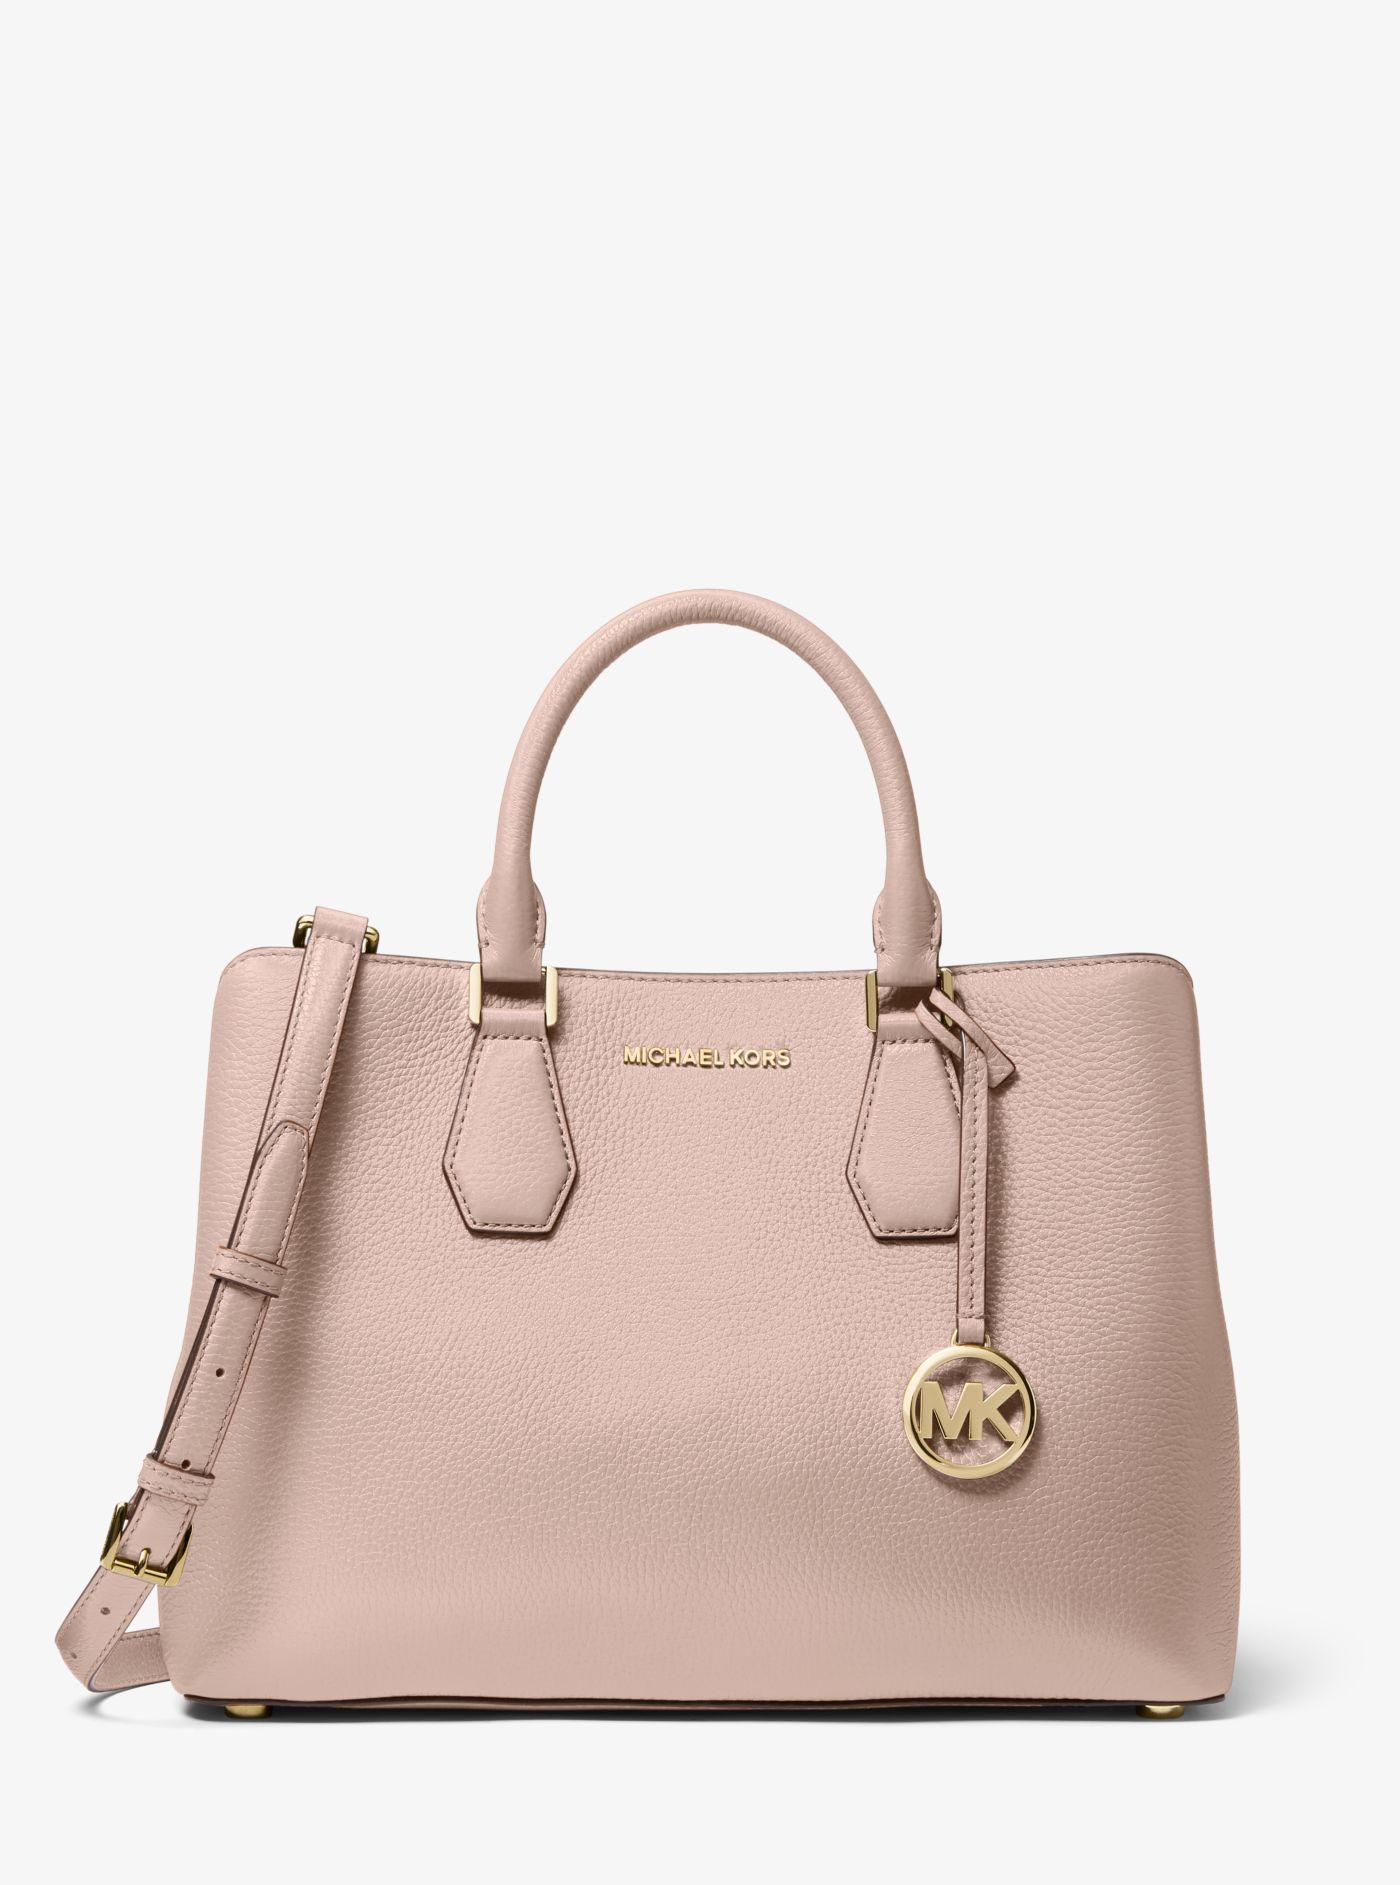 Michael Kors Camille Large Pebbled Leather Satchel in Pink | Lyst Canada